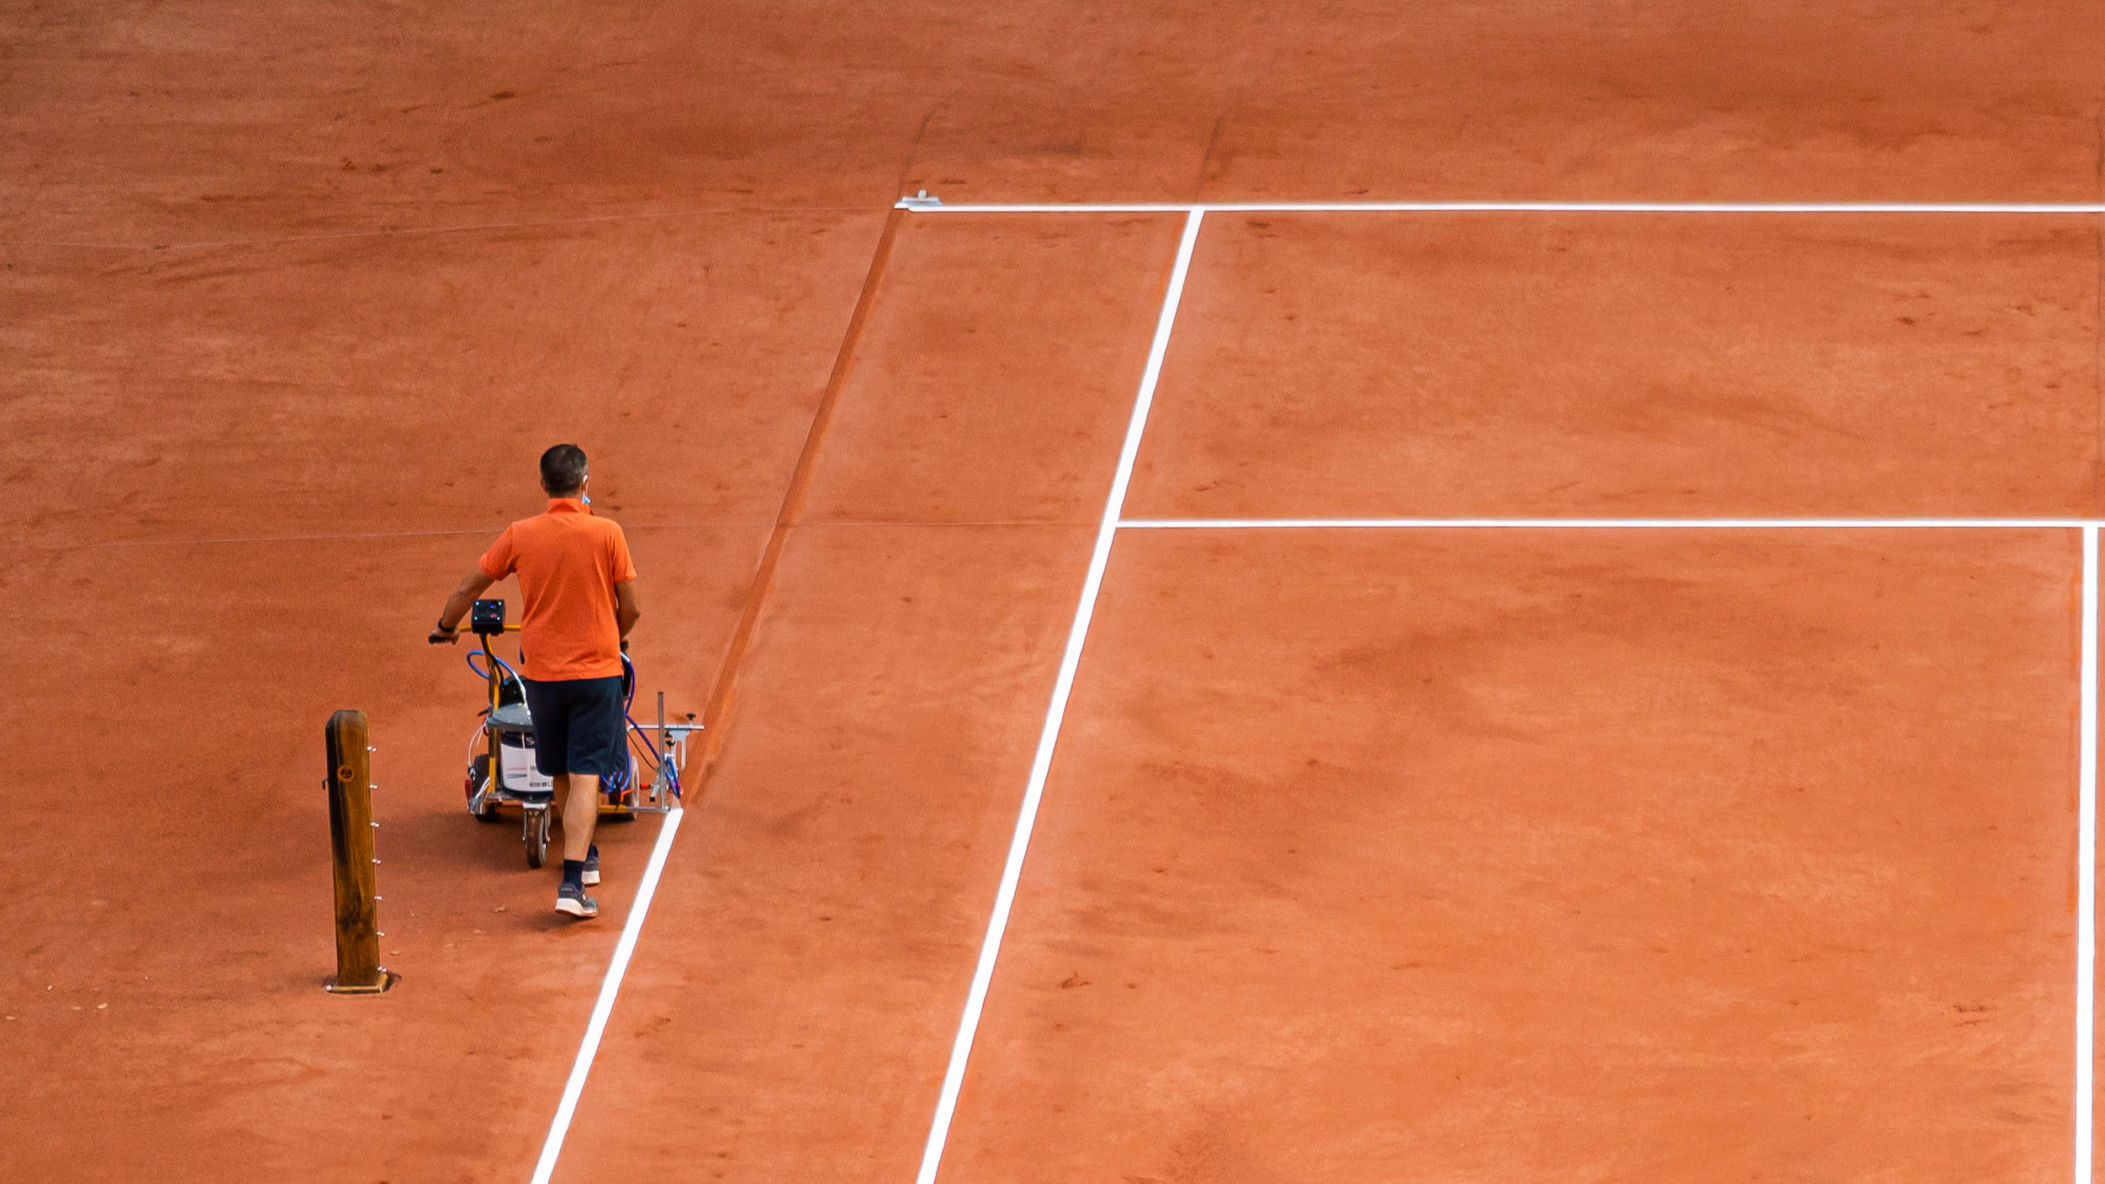 French Open attendance reduced to 5,000 fans per day Opoyi